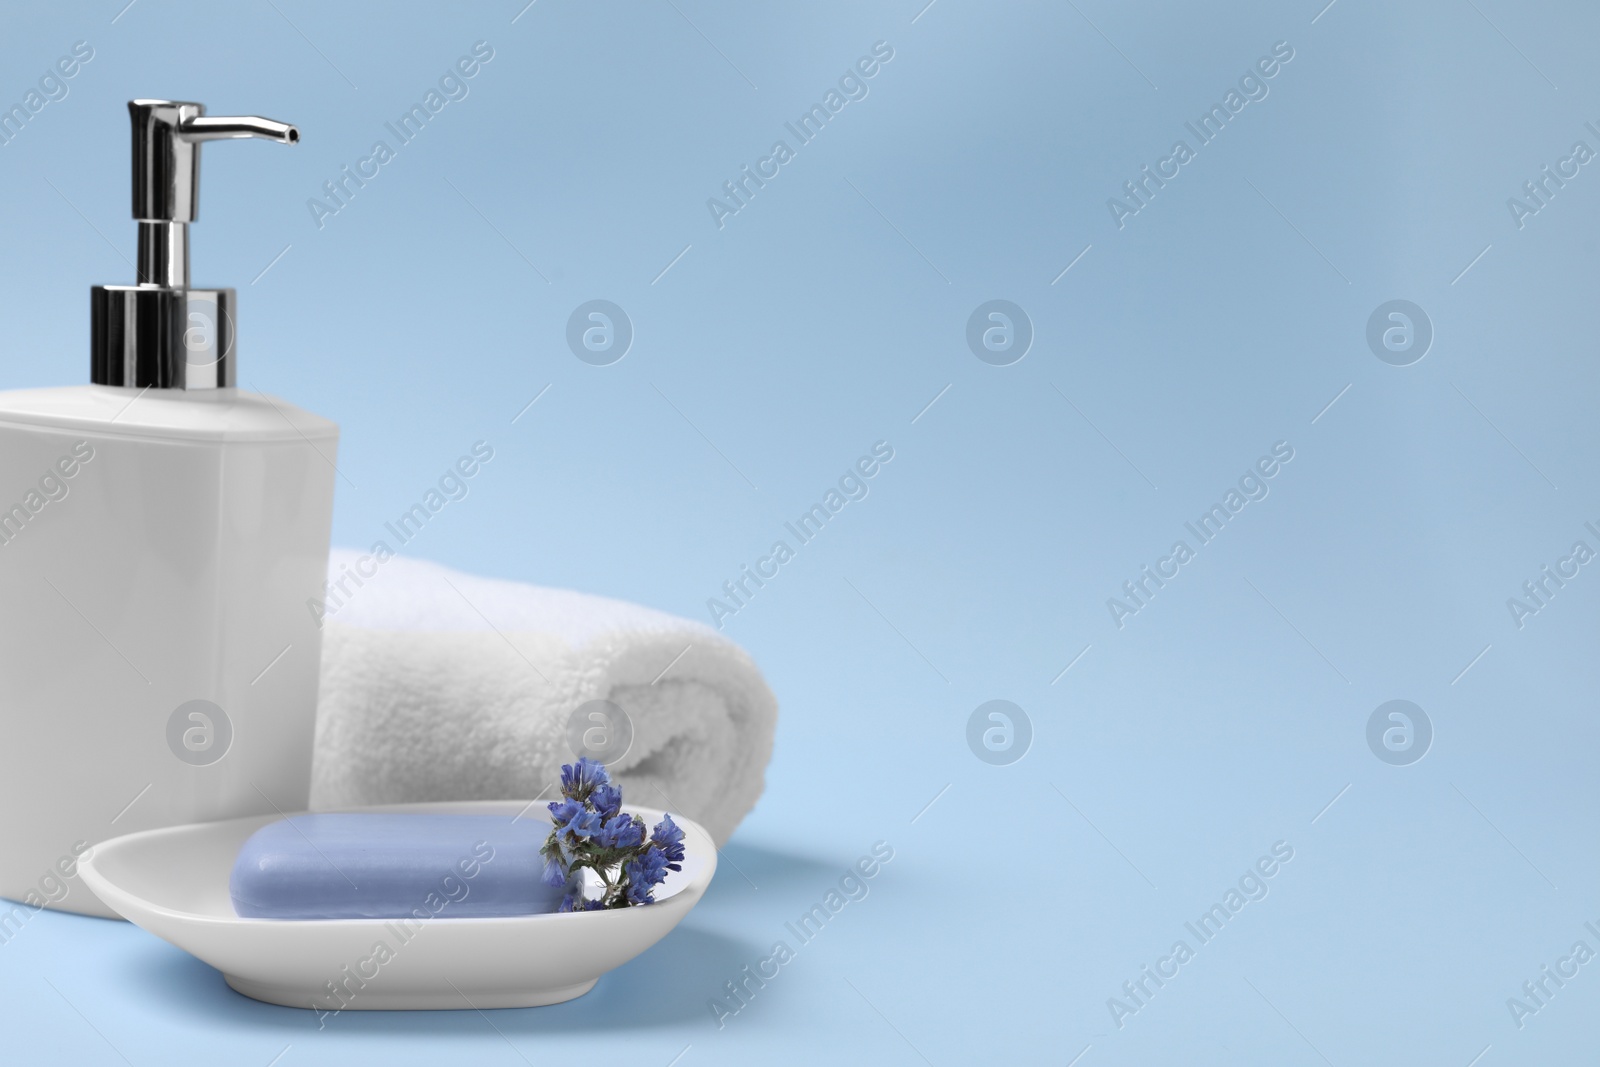 Photo of Soap bar, bottle dispenser and towel on light blue background, space for text